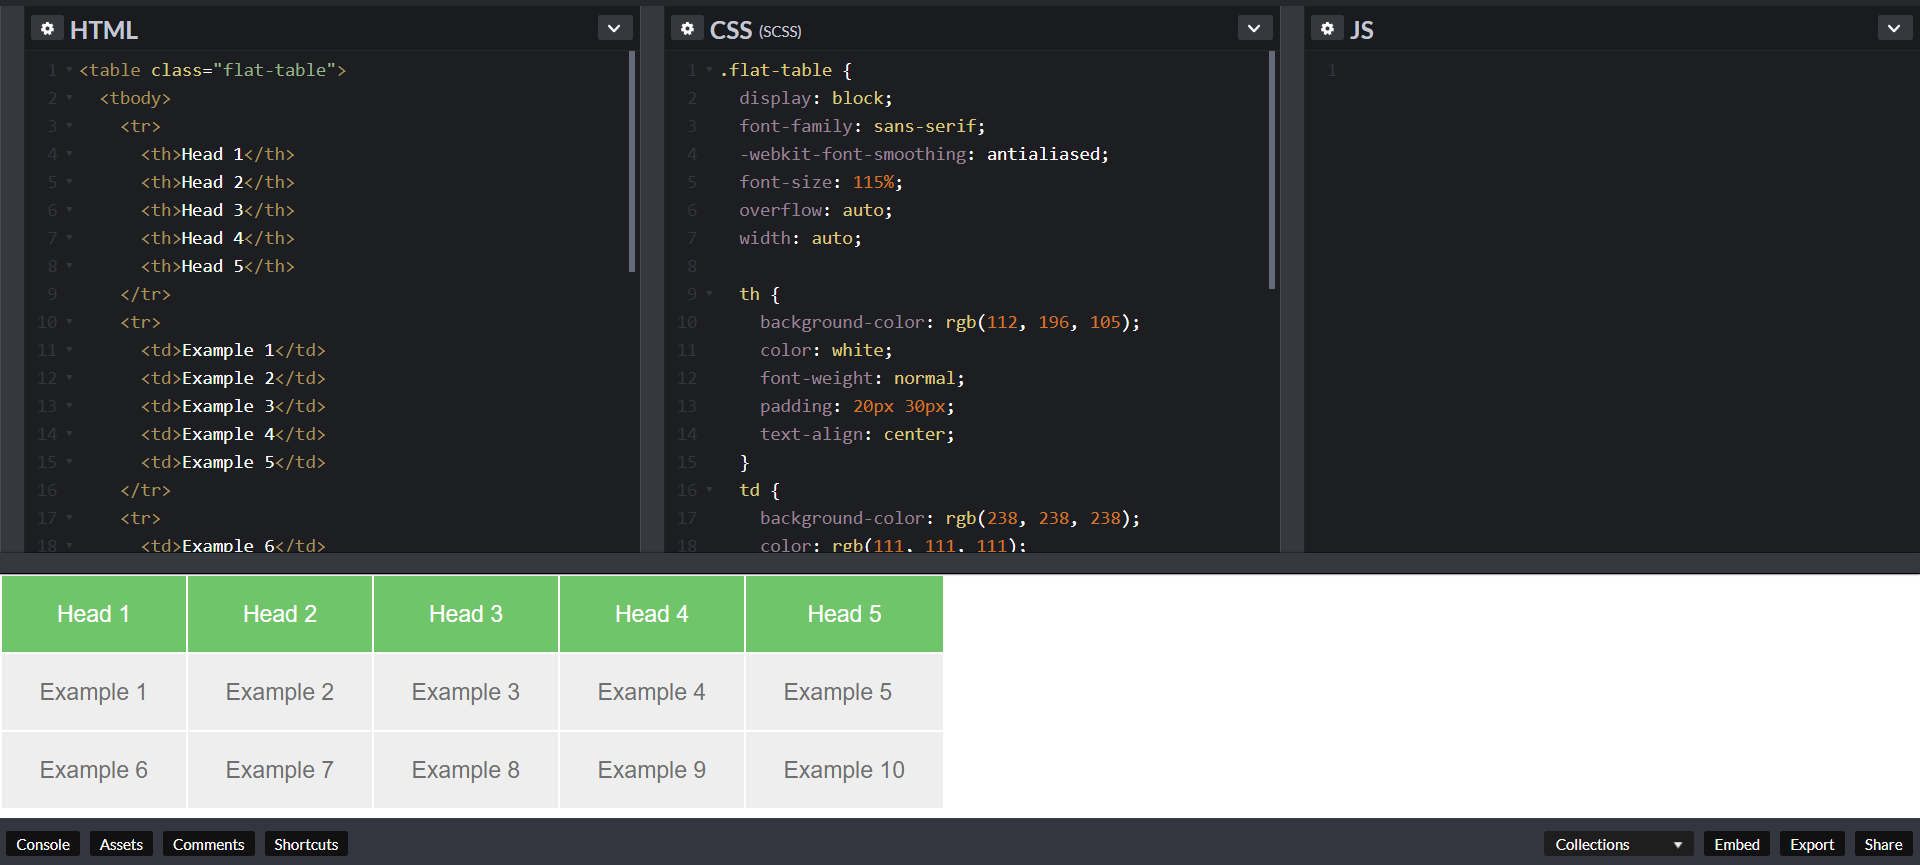 Free Css Editor Download